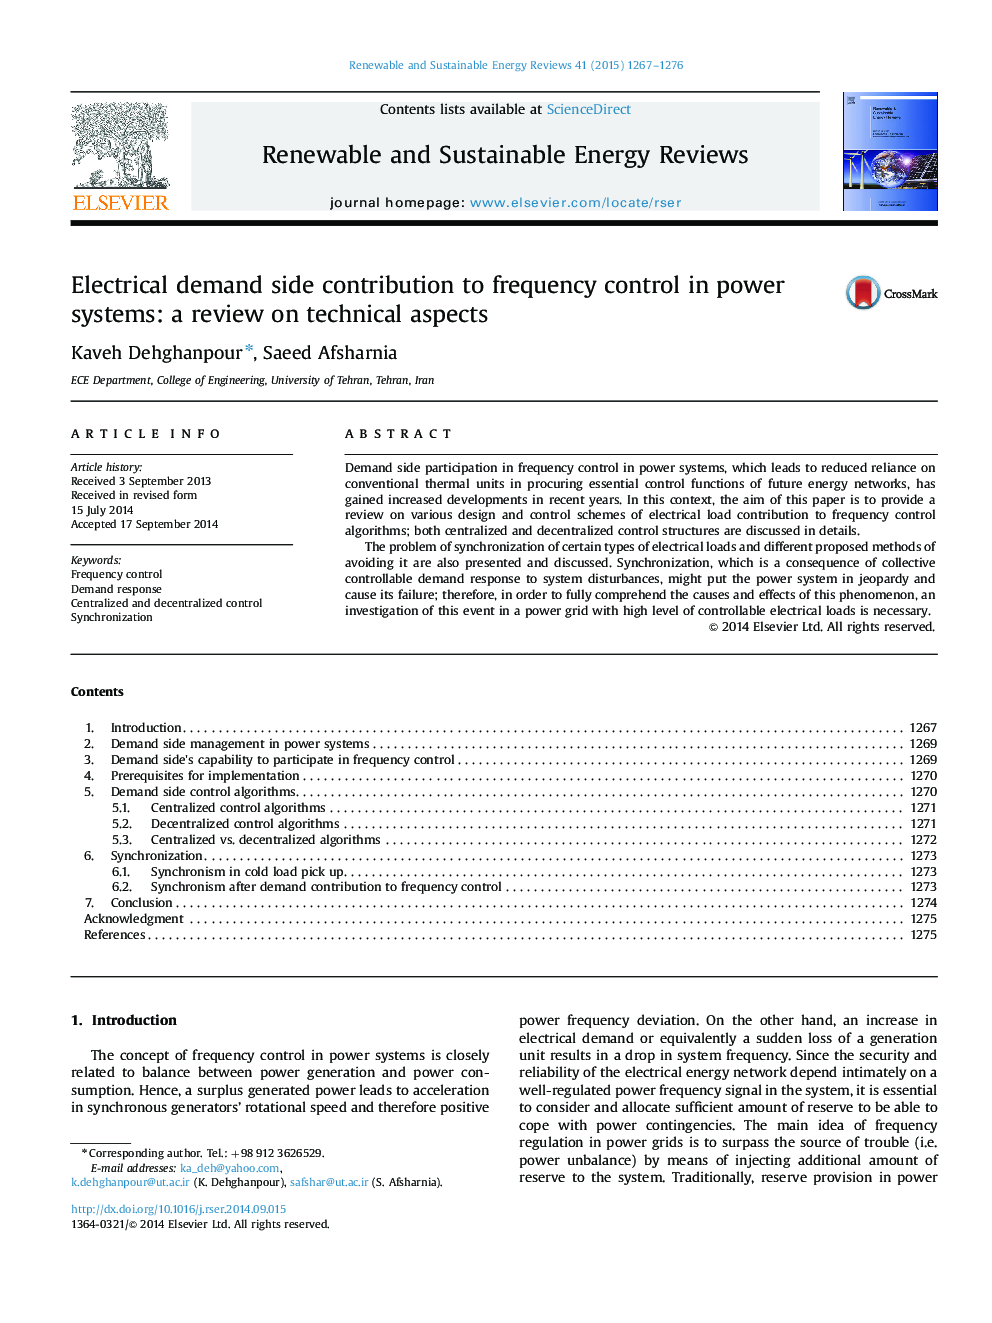 Electrical demand side contribution to frequency control in power systems: a review on technical aspects